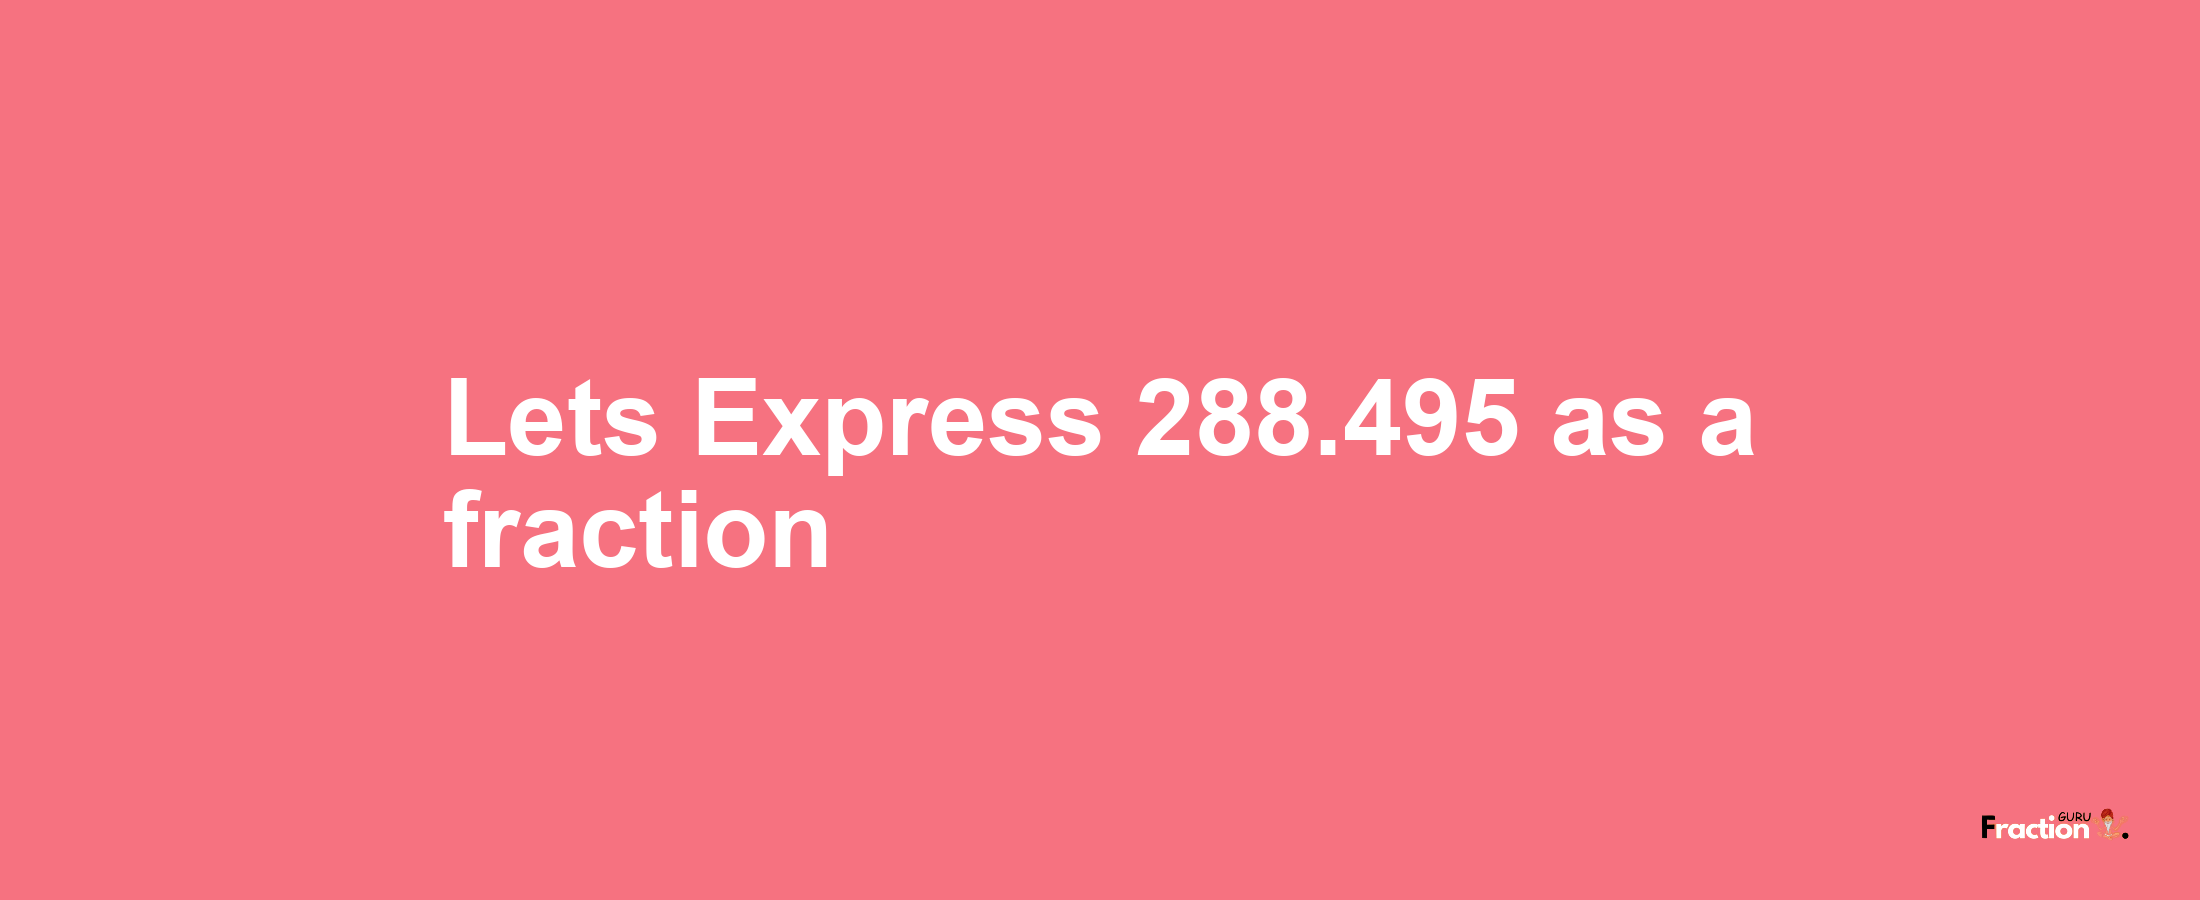 Lets Express 288.495 as afraction